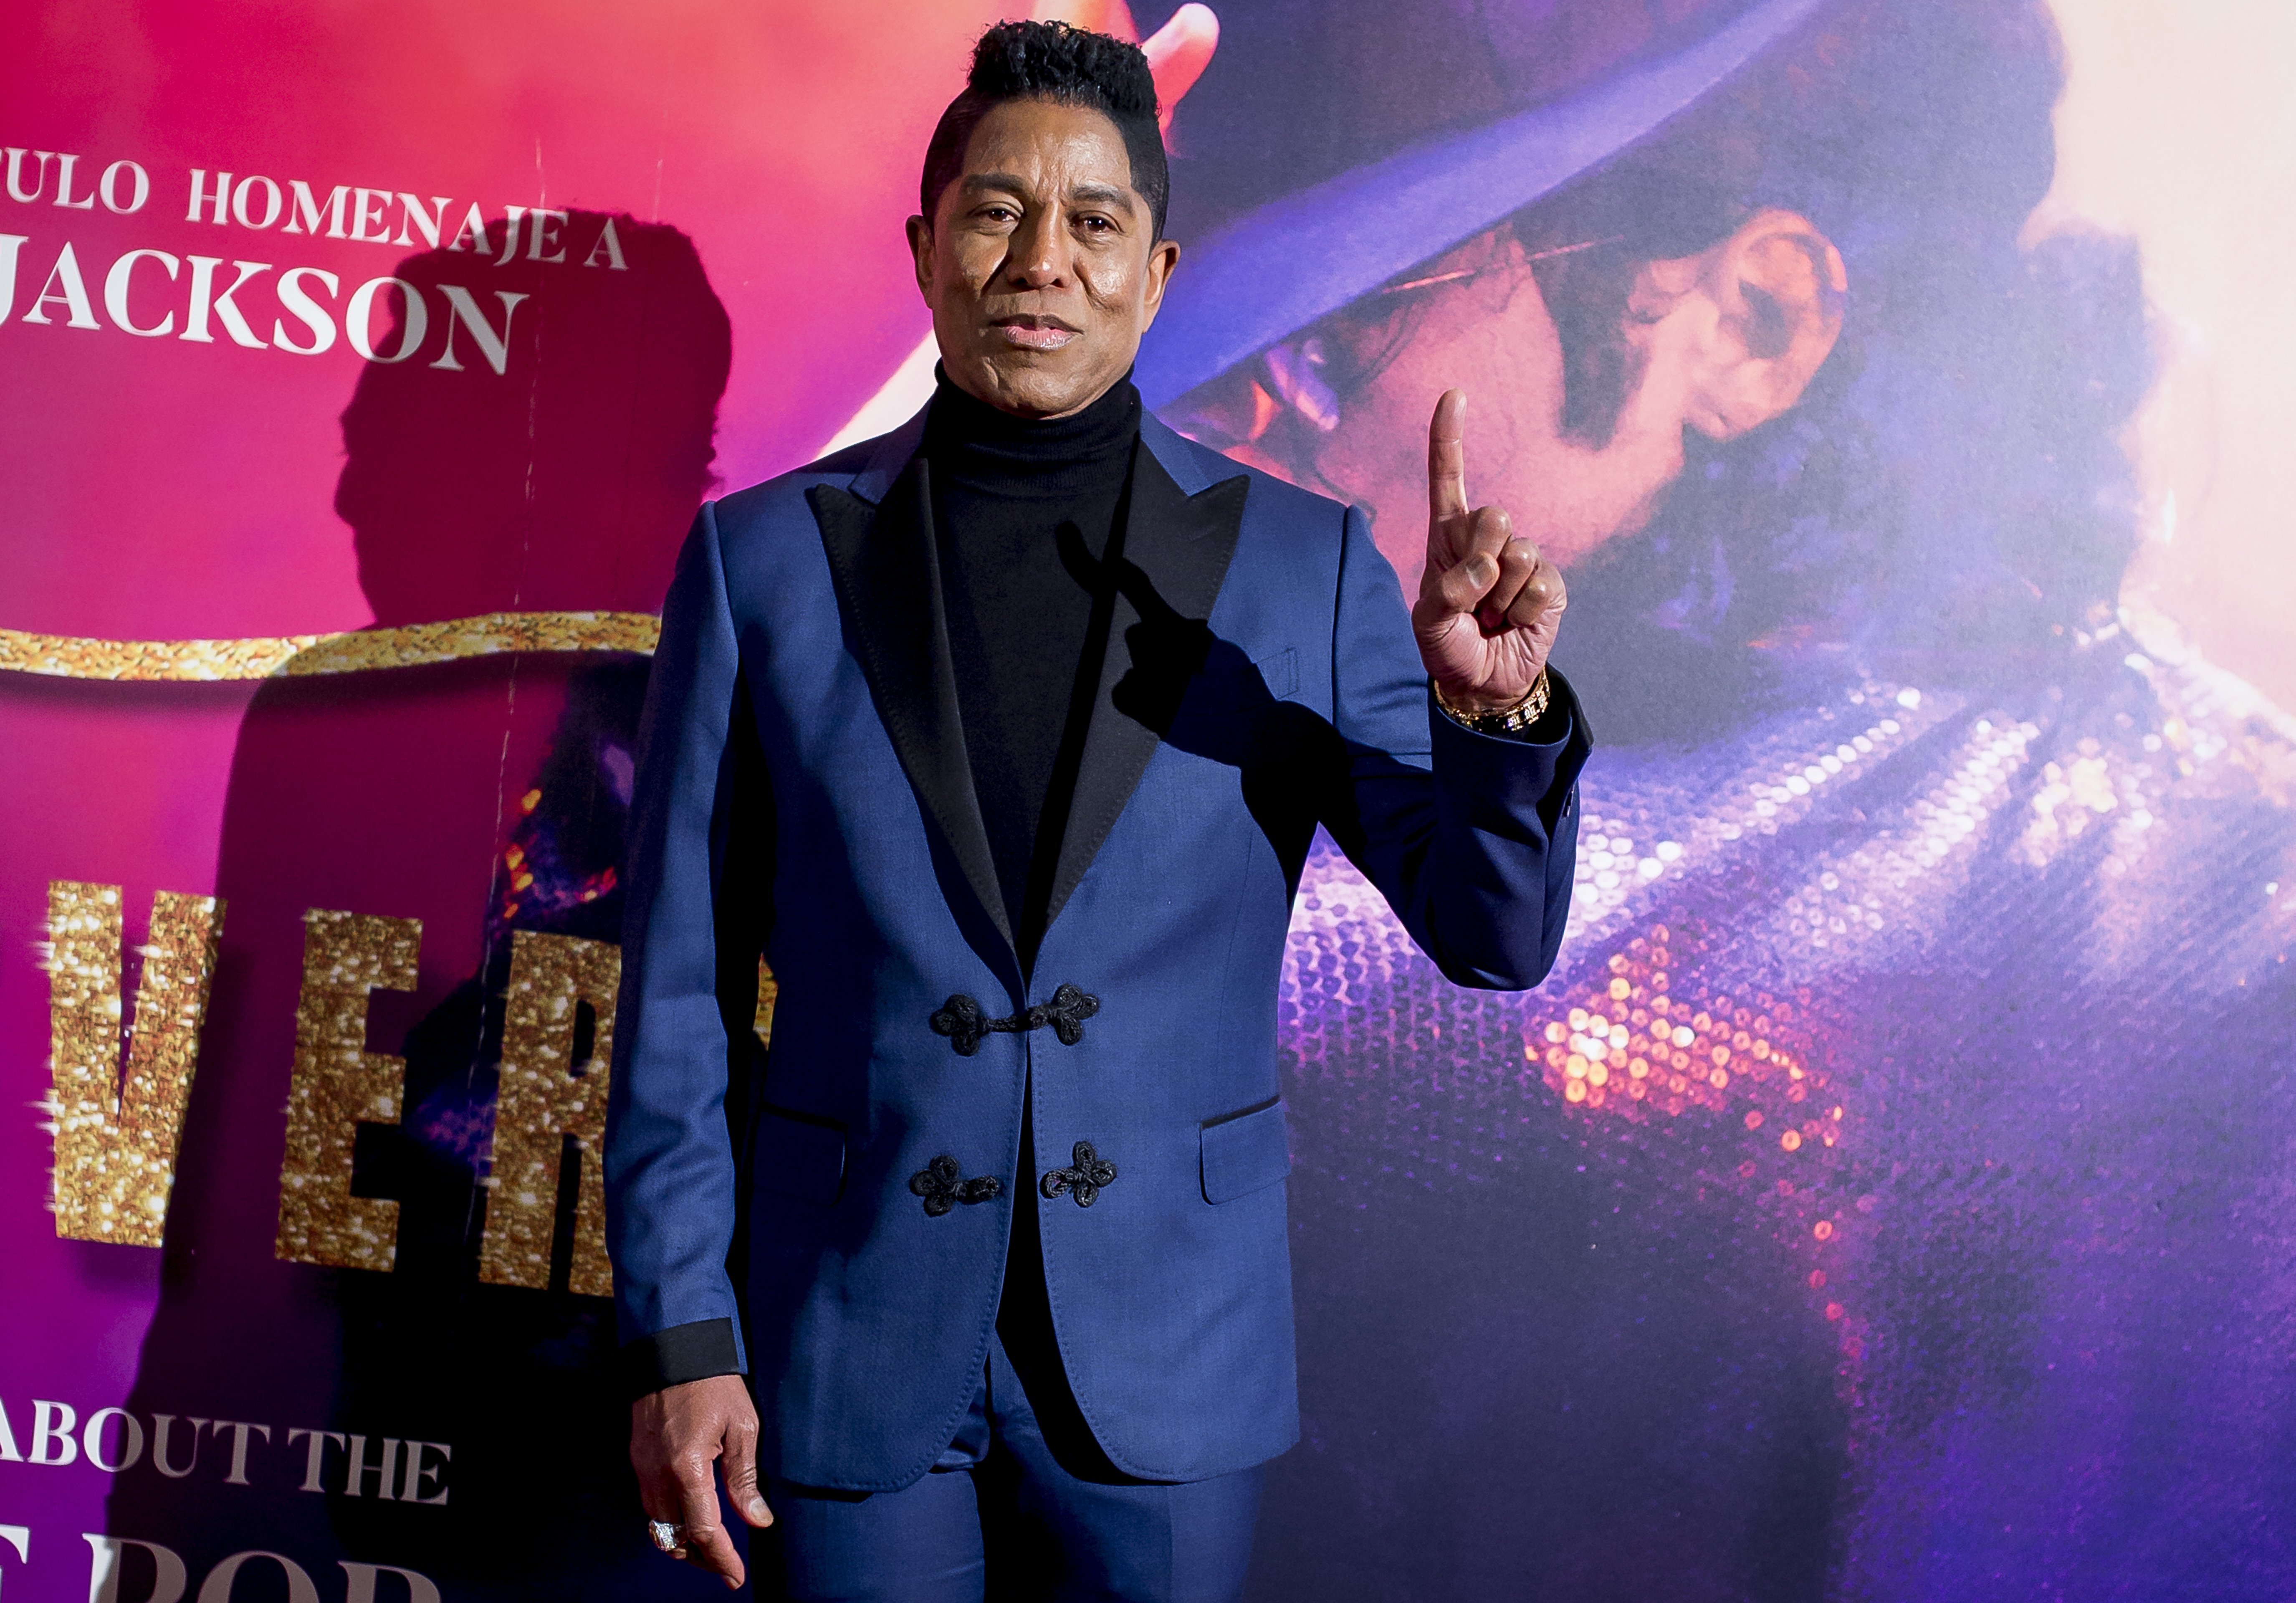 Jermaine Jackson attends the "Forever Jackson" Madrid Premiere on January 18, 2018, in Madrid, Spain. | Source: Getty Images.